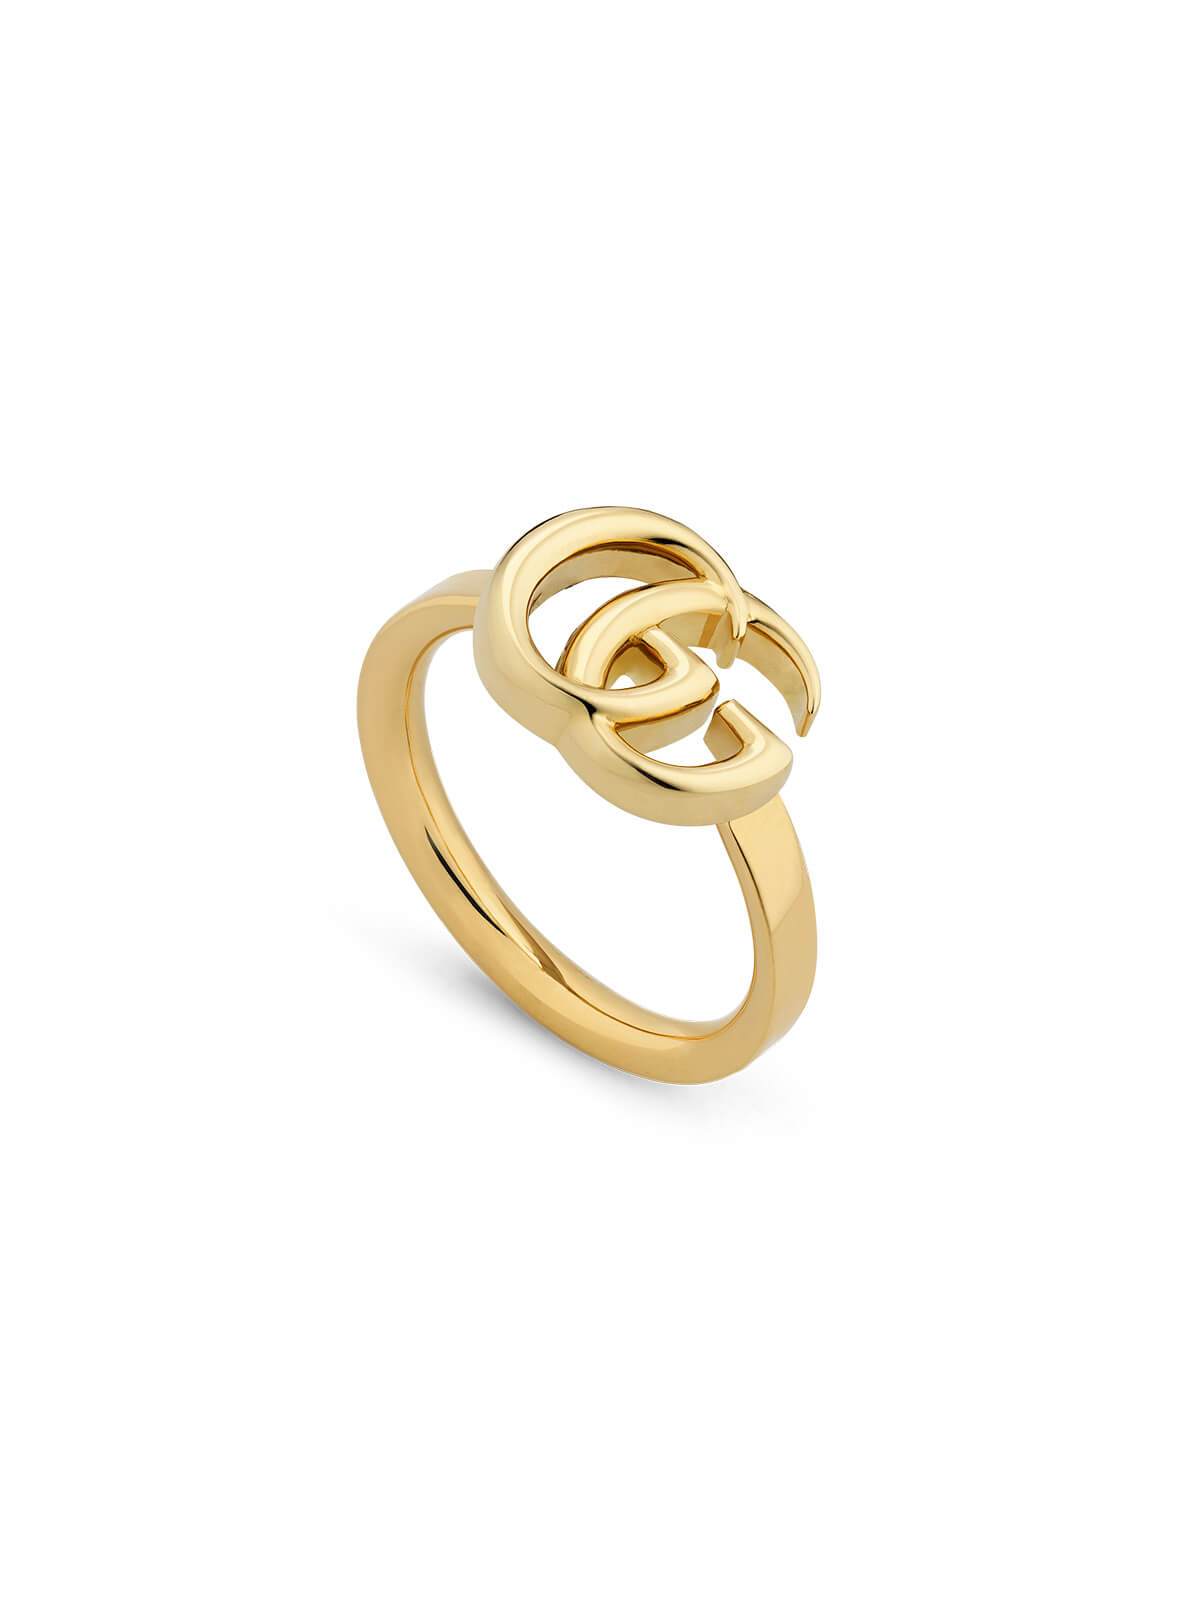 Gucci GG Running Ring in 18ct Yellow Gold - Size M-N YBC525690001013